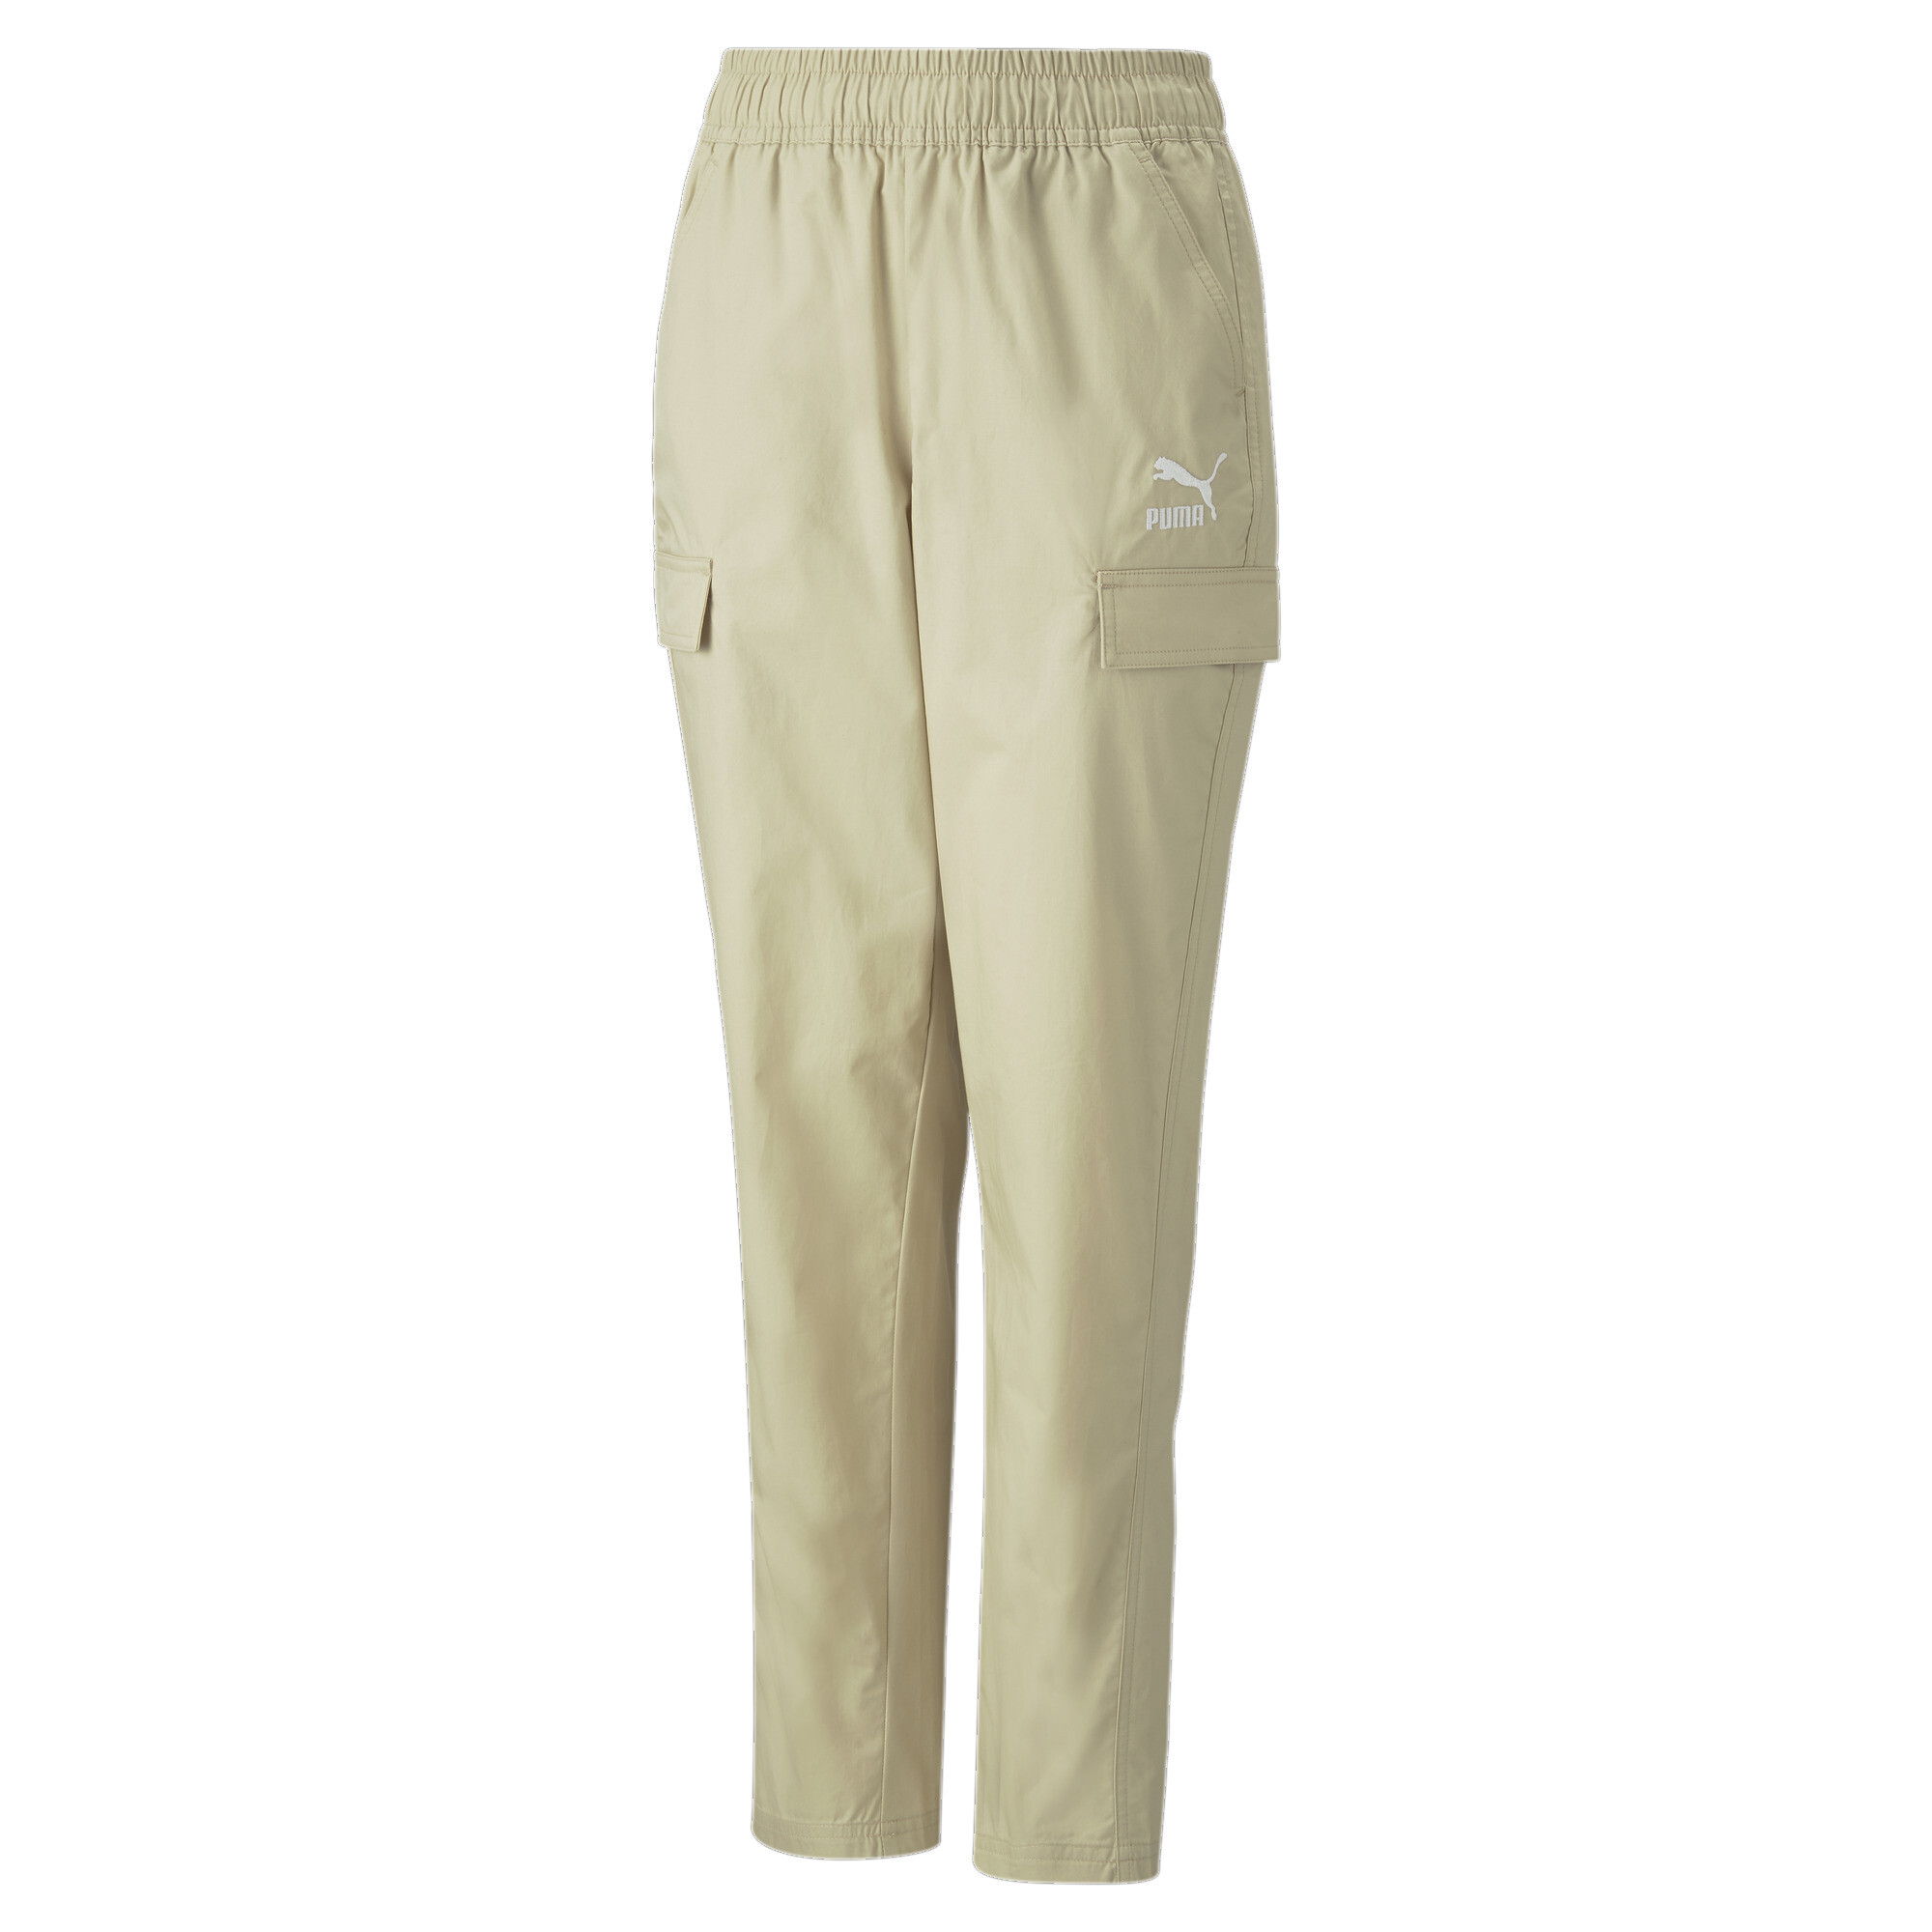 Puma Classics Woven Sweatpants Youth, Beige, Size 4-5Y, Clothing